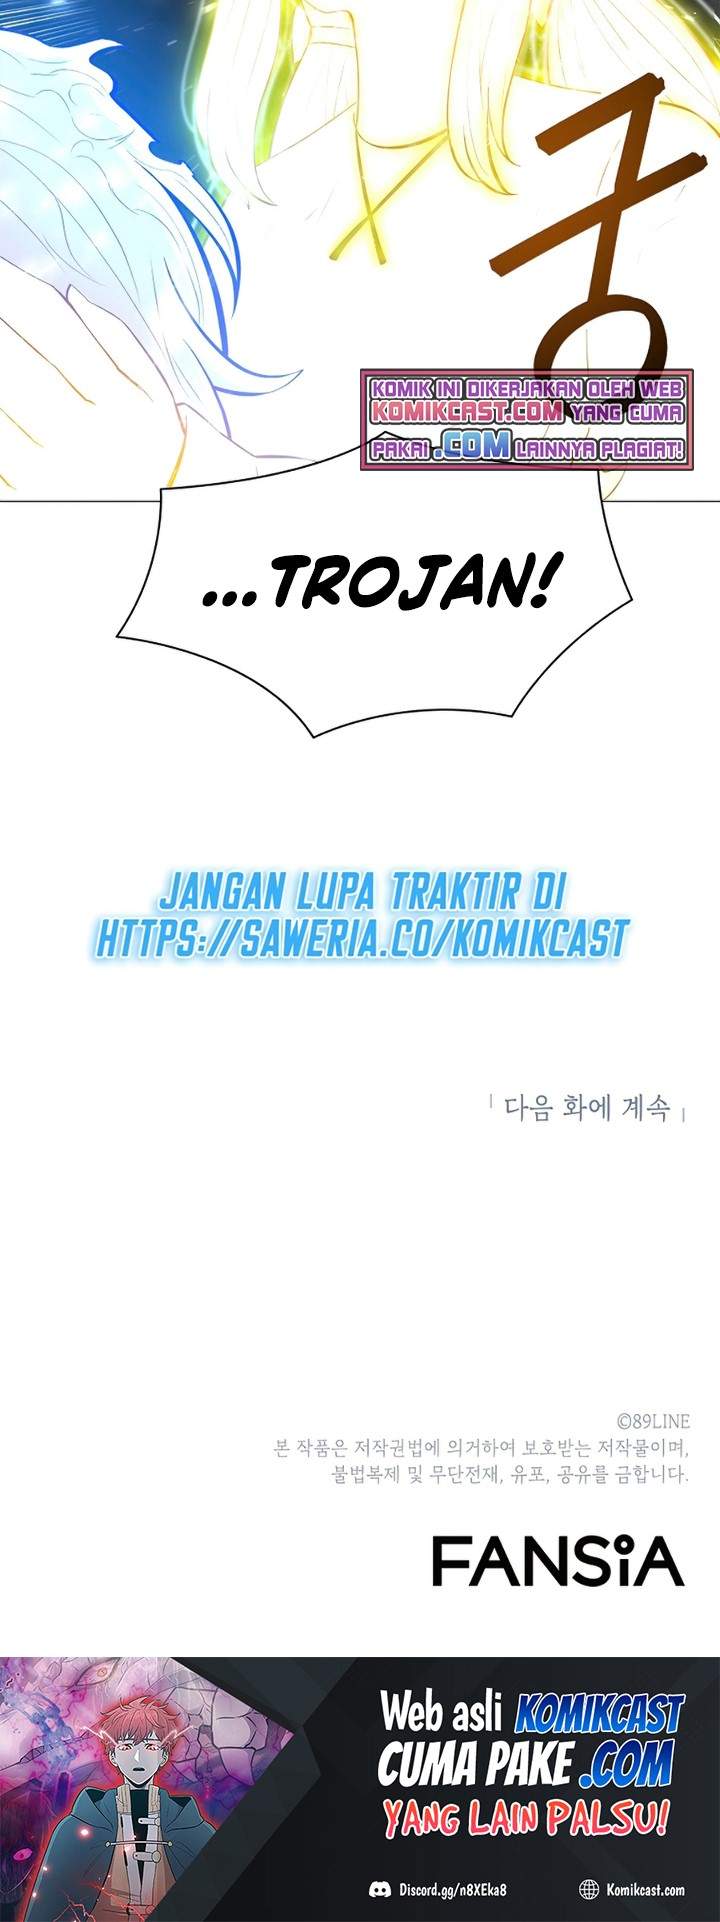 Updater Chapter 50